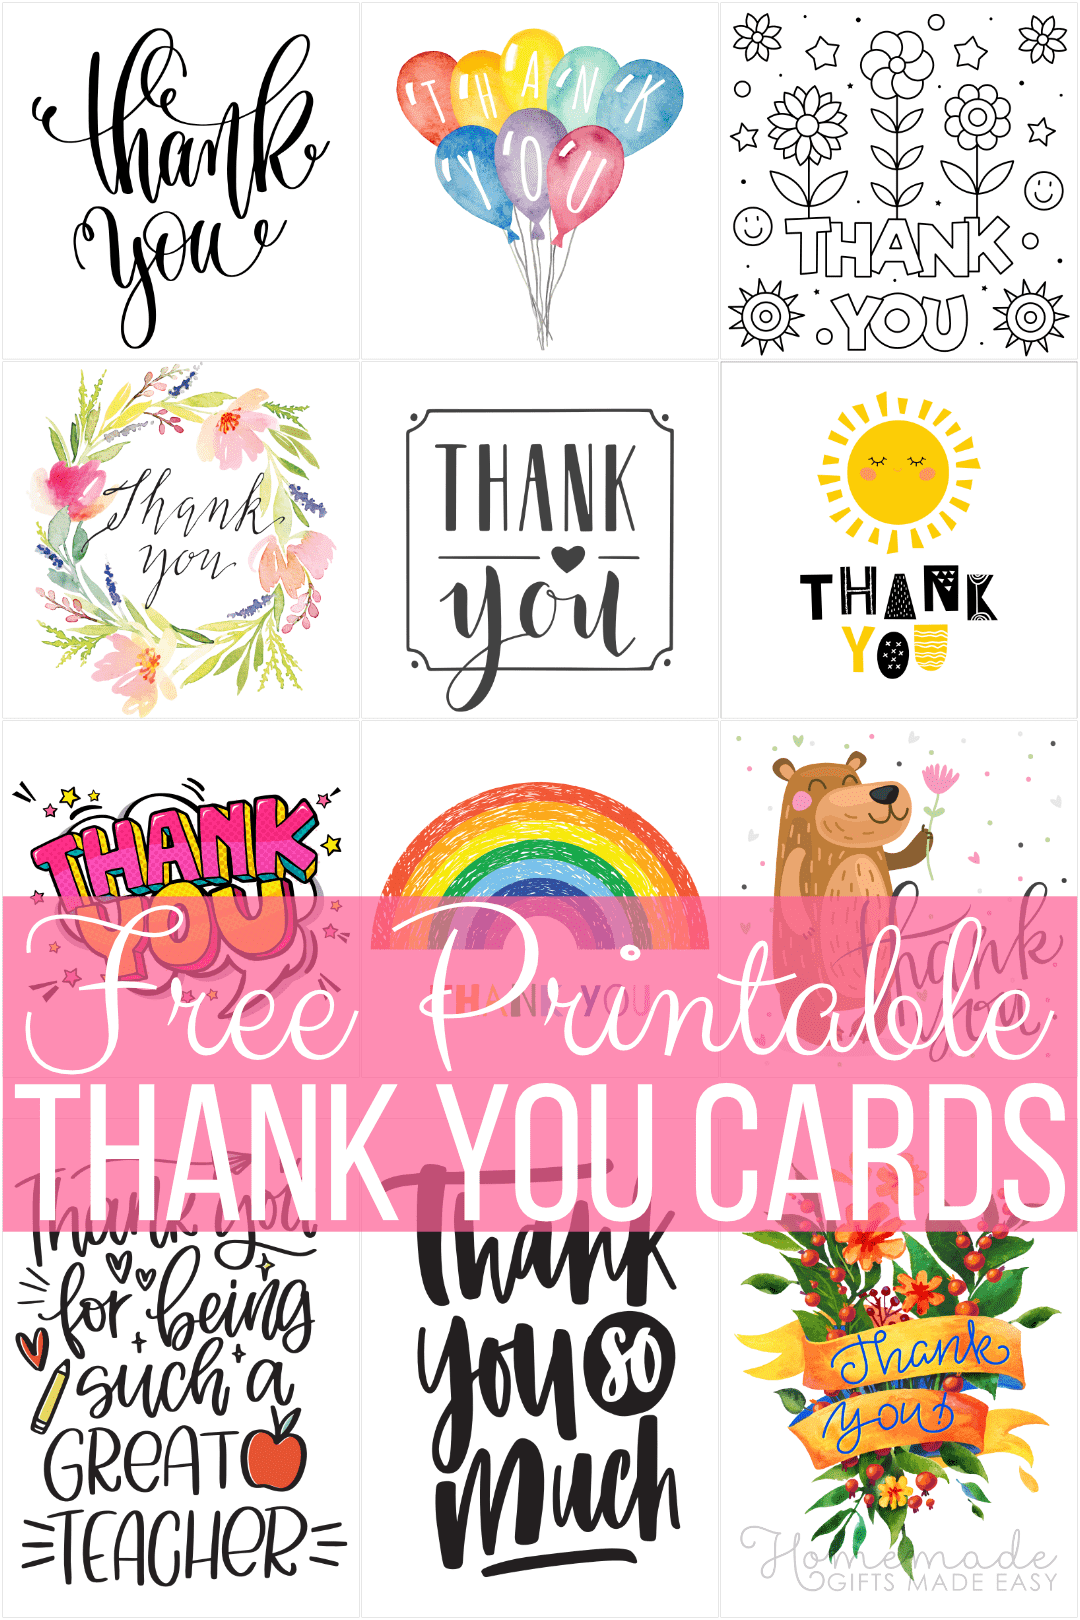 22 Free Printable Thank You Cards - Stylish High Quality Designs Throughout Free Templates For Cards Print